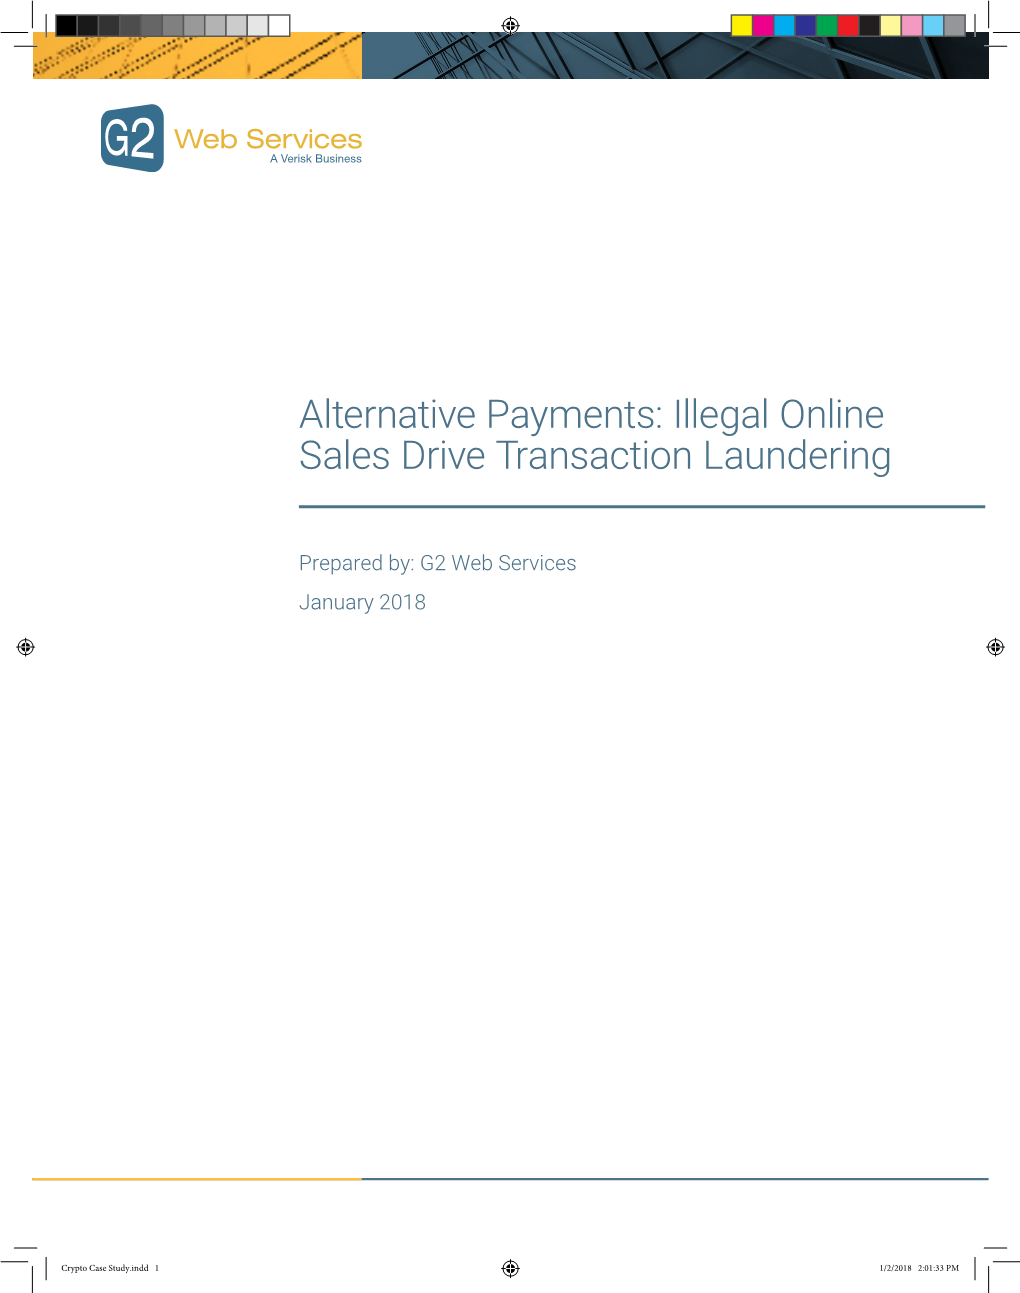 Alternative Payments: Illegal Online Sales Drive Transaction Laundering